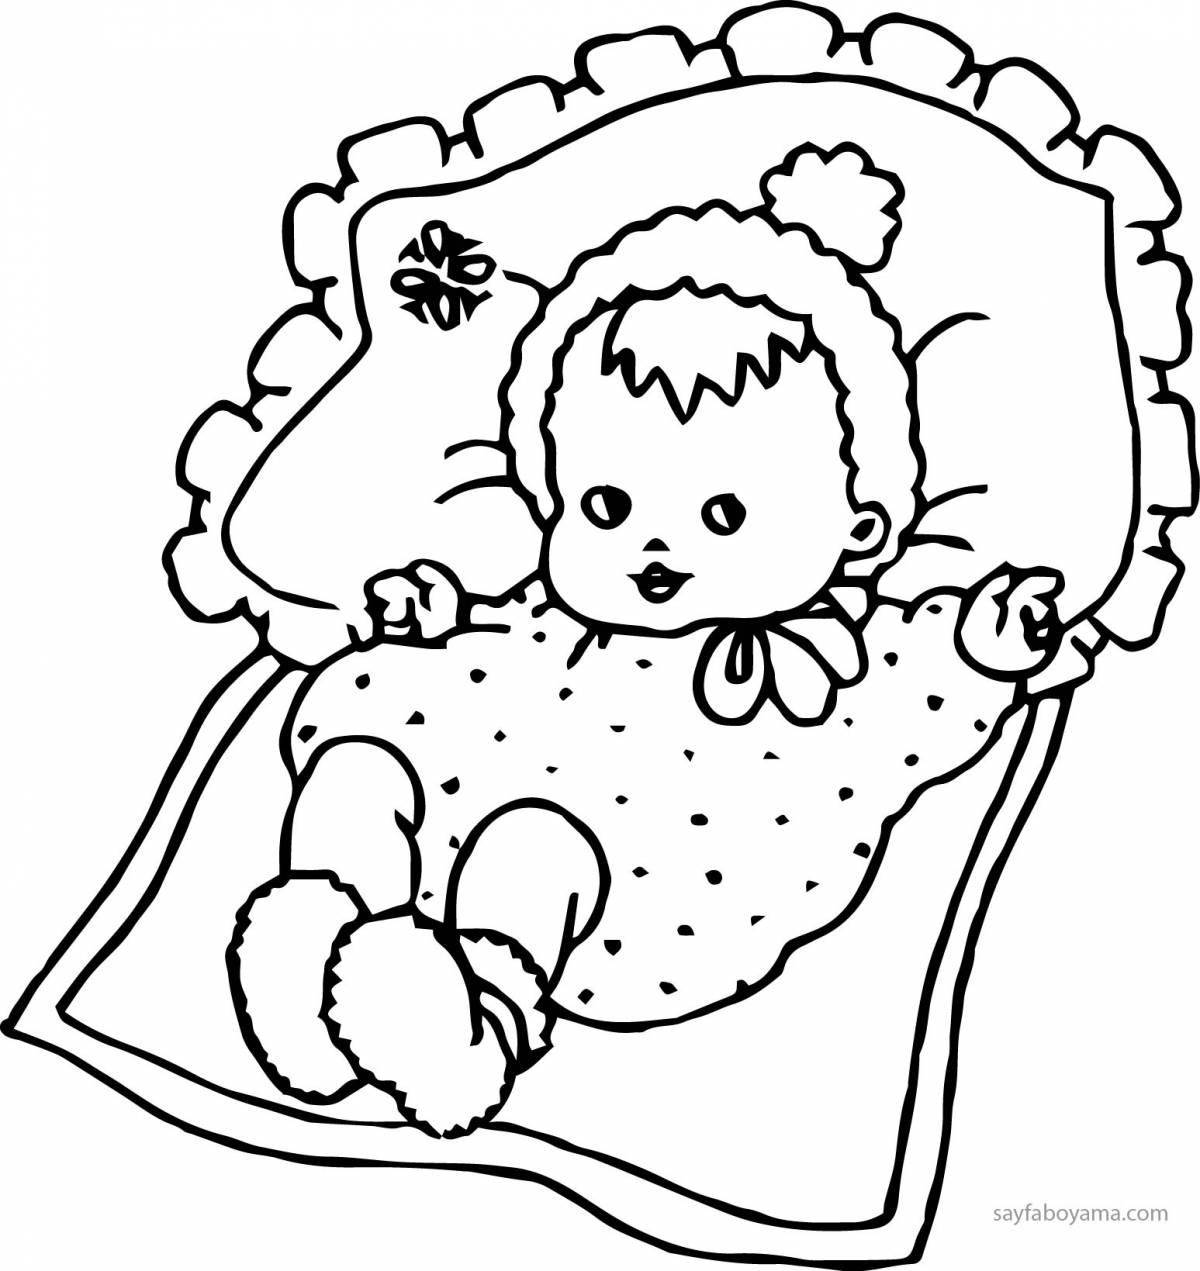 Snuggly stroller coloring book